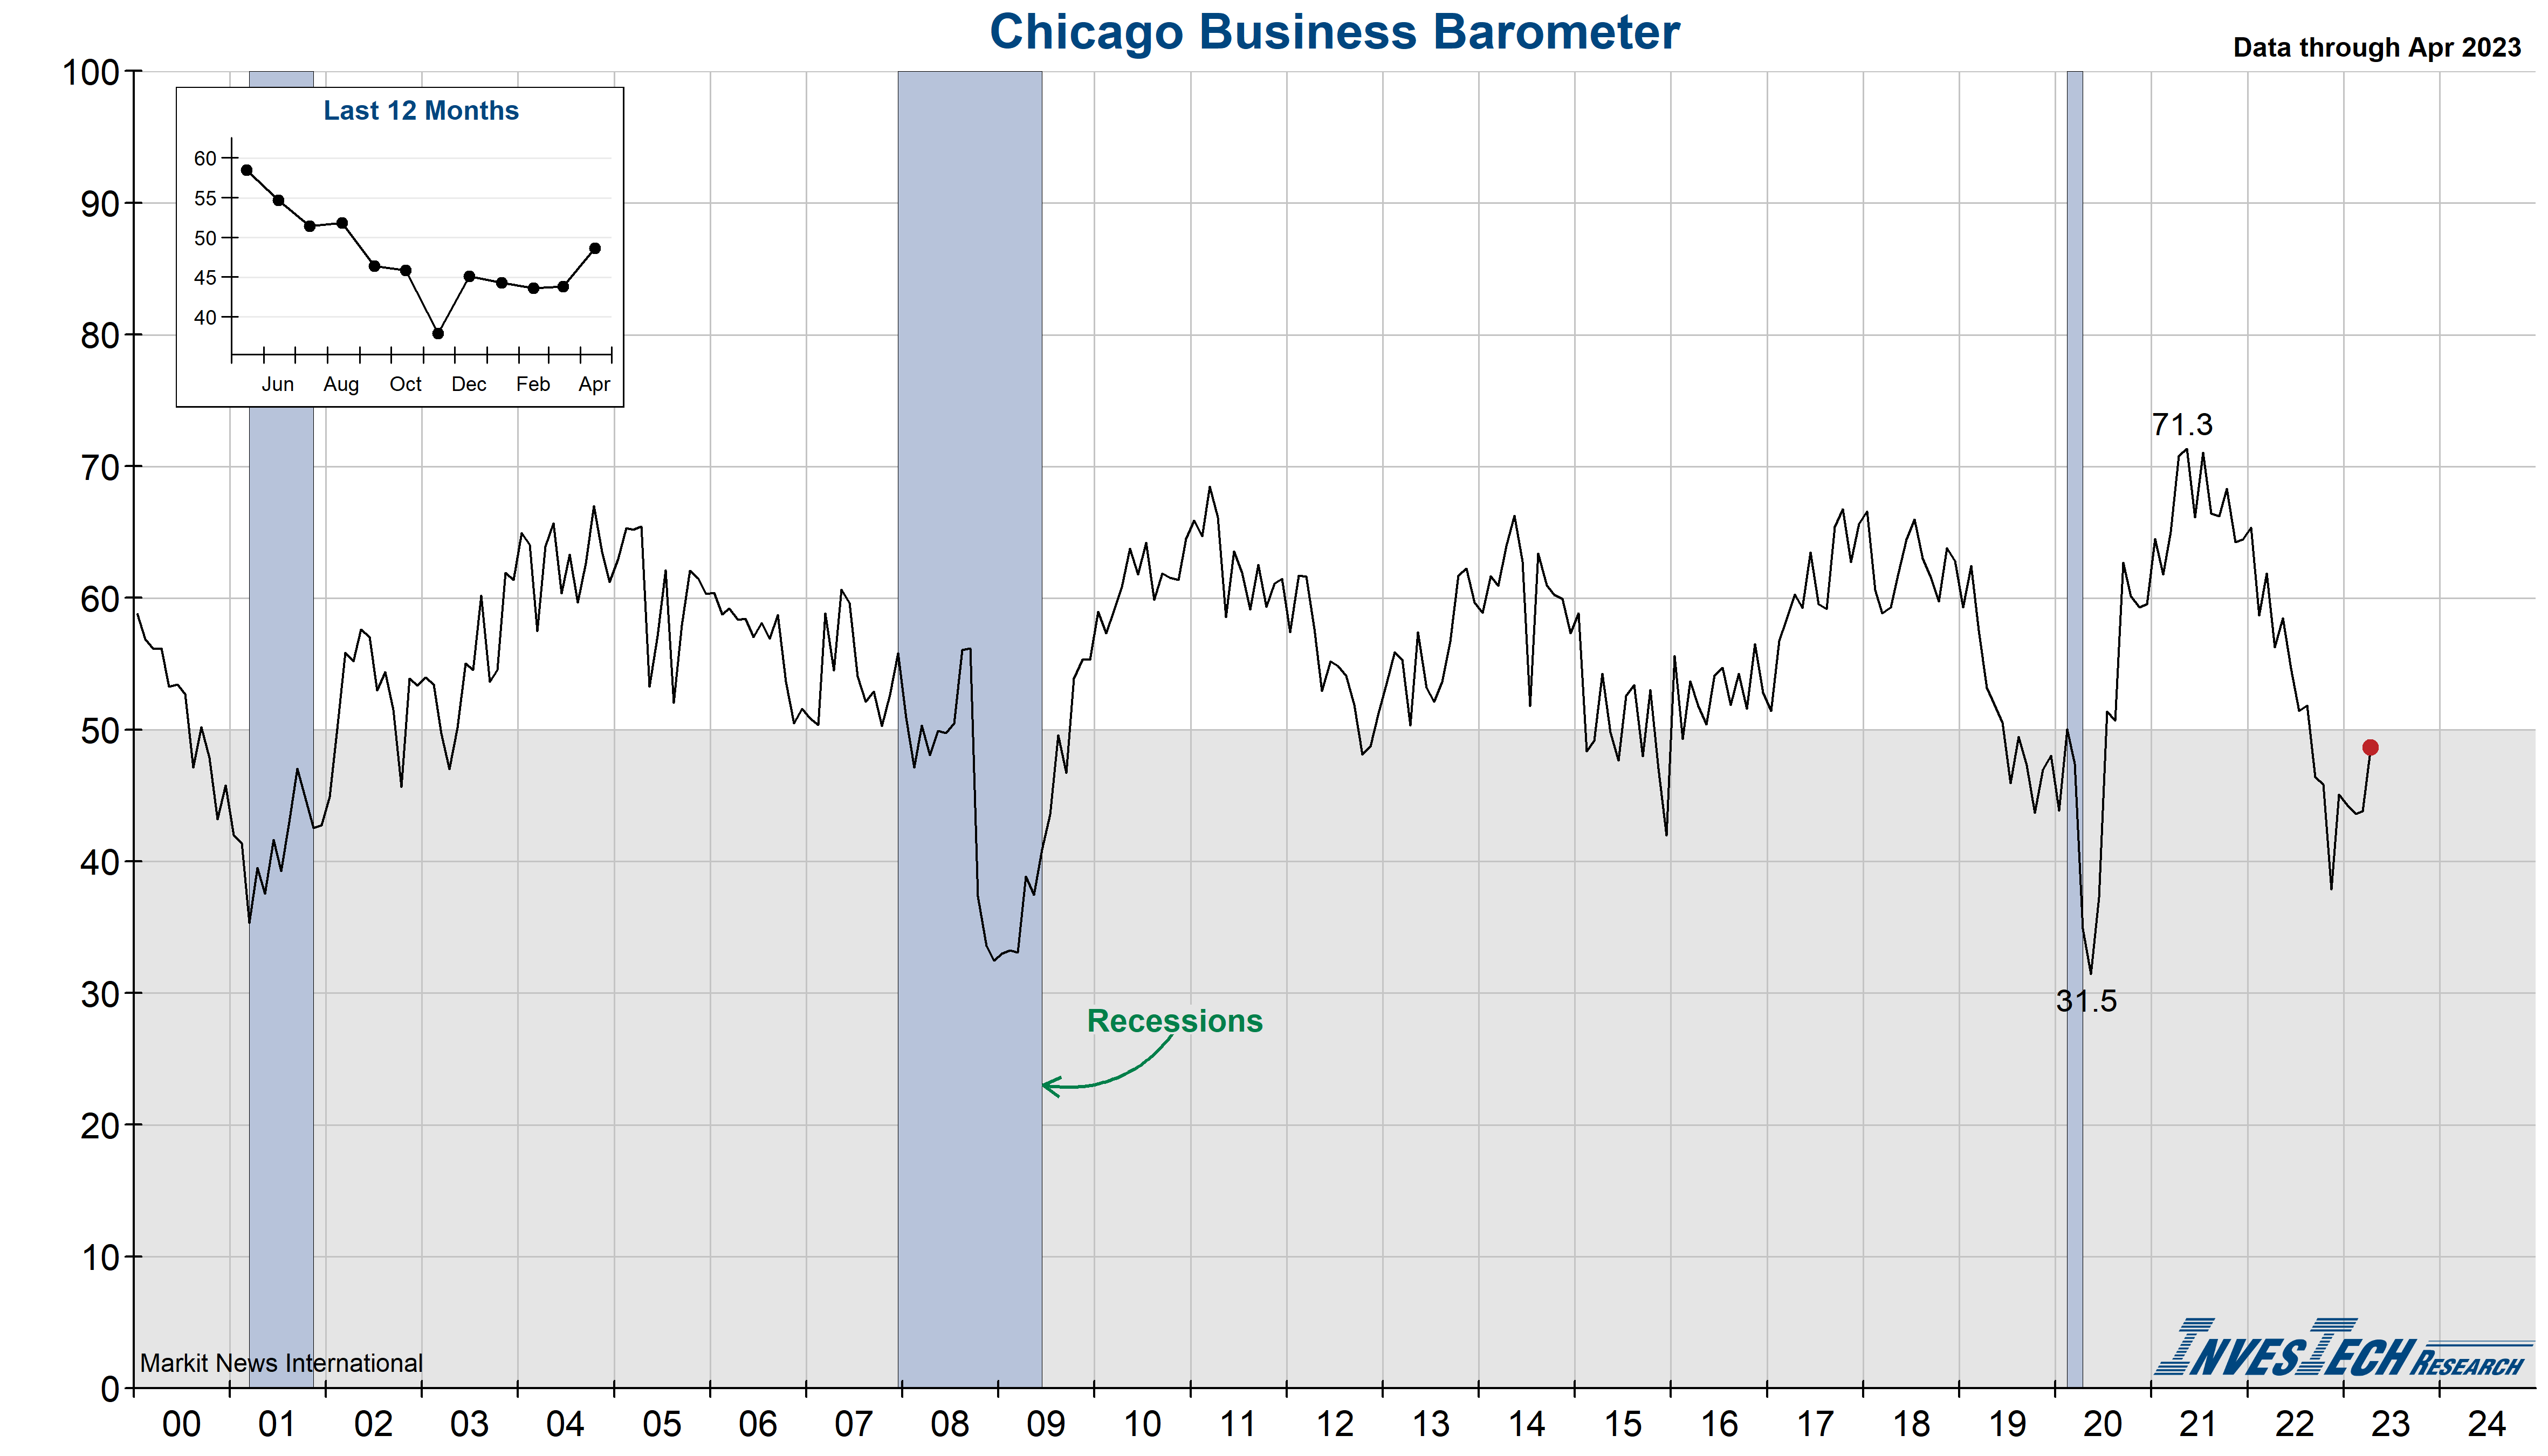 ISM Chicago Business Barometer (Chicago Purchasing Manager’s Index)